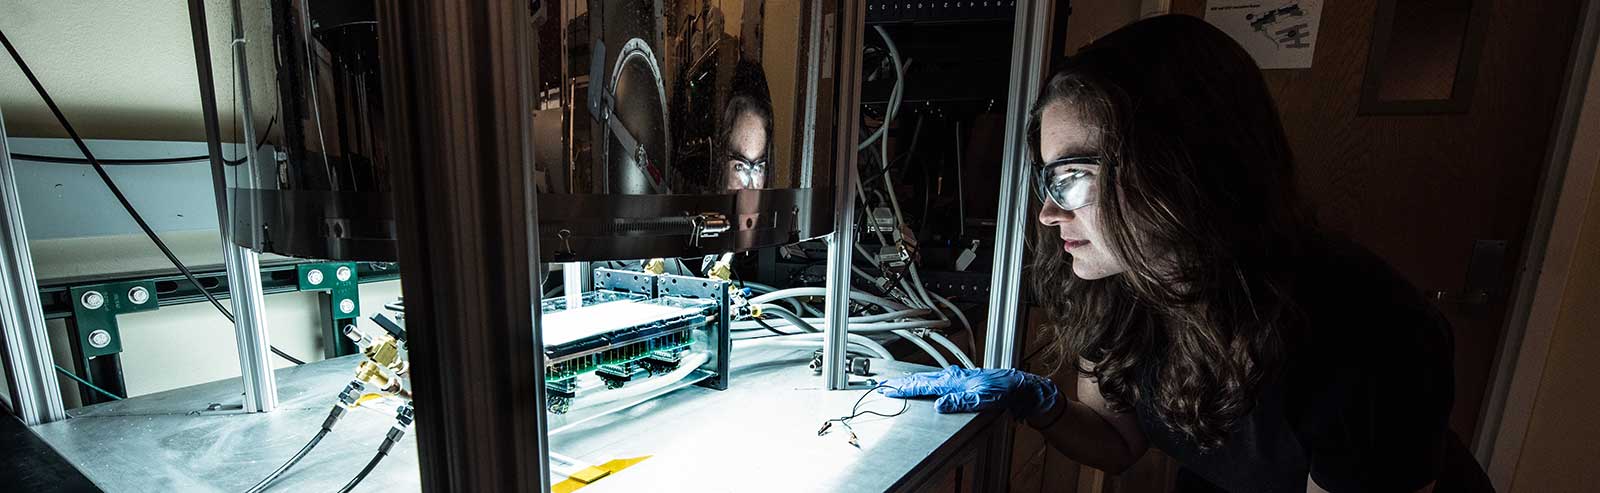 A scientist works with a solar simulator for durability testing of devices.